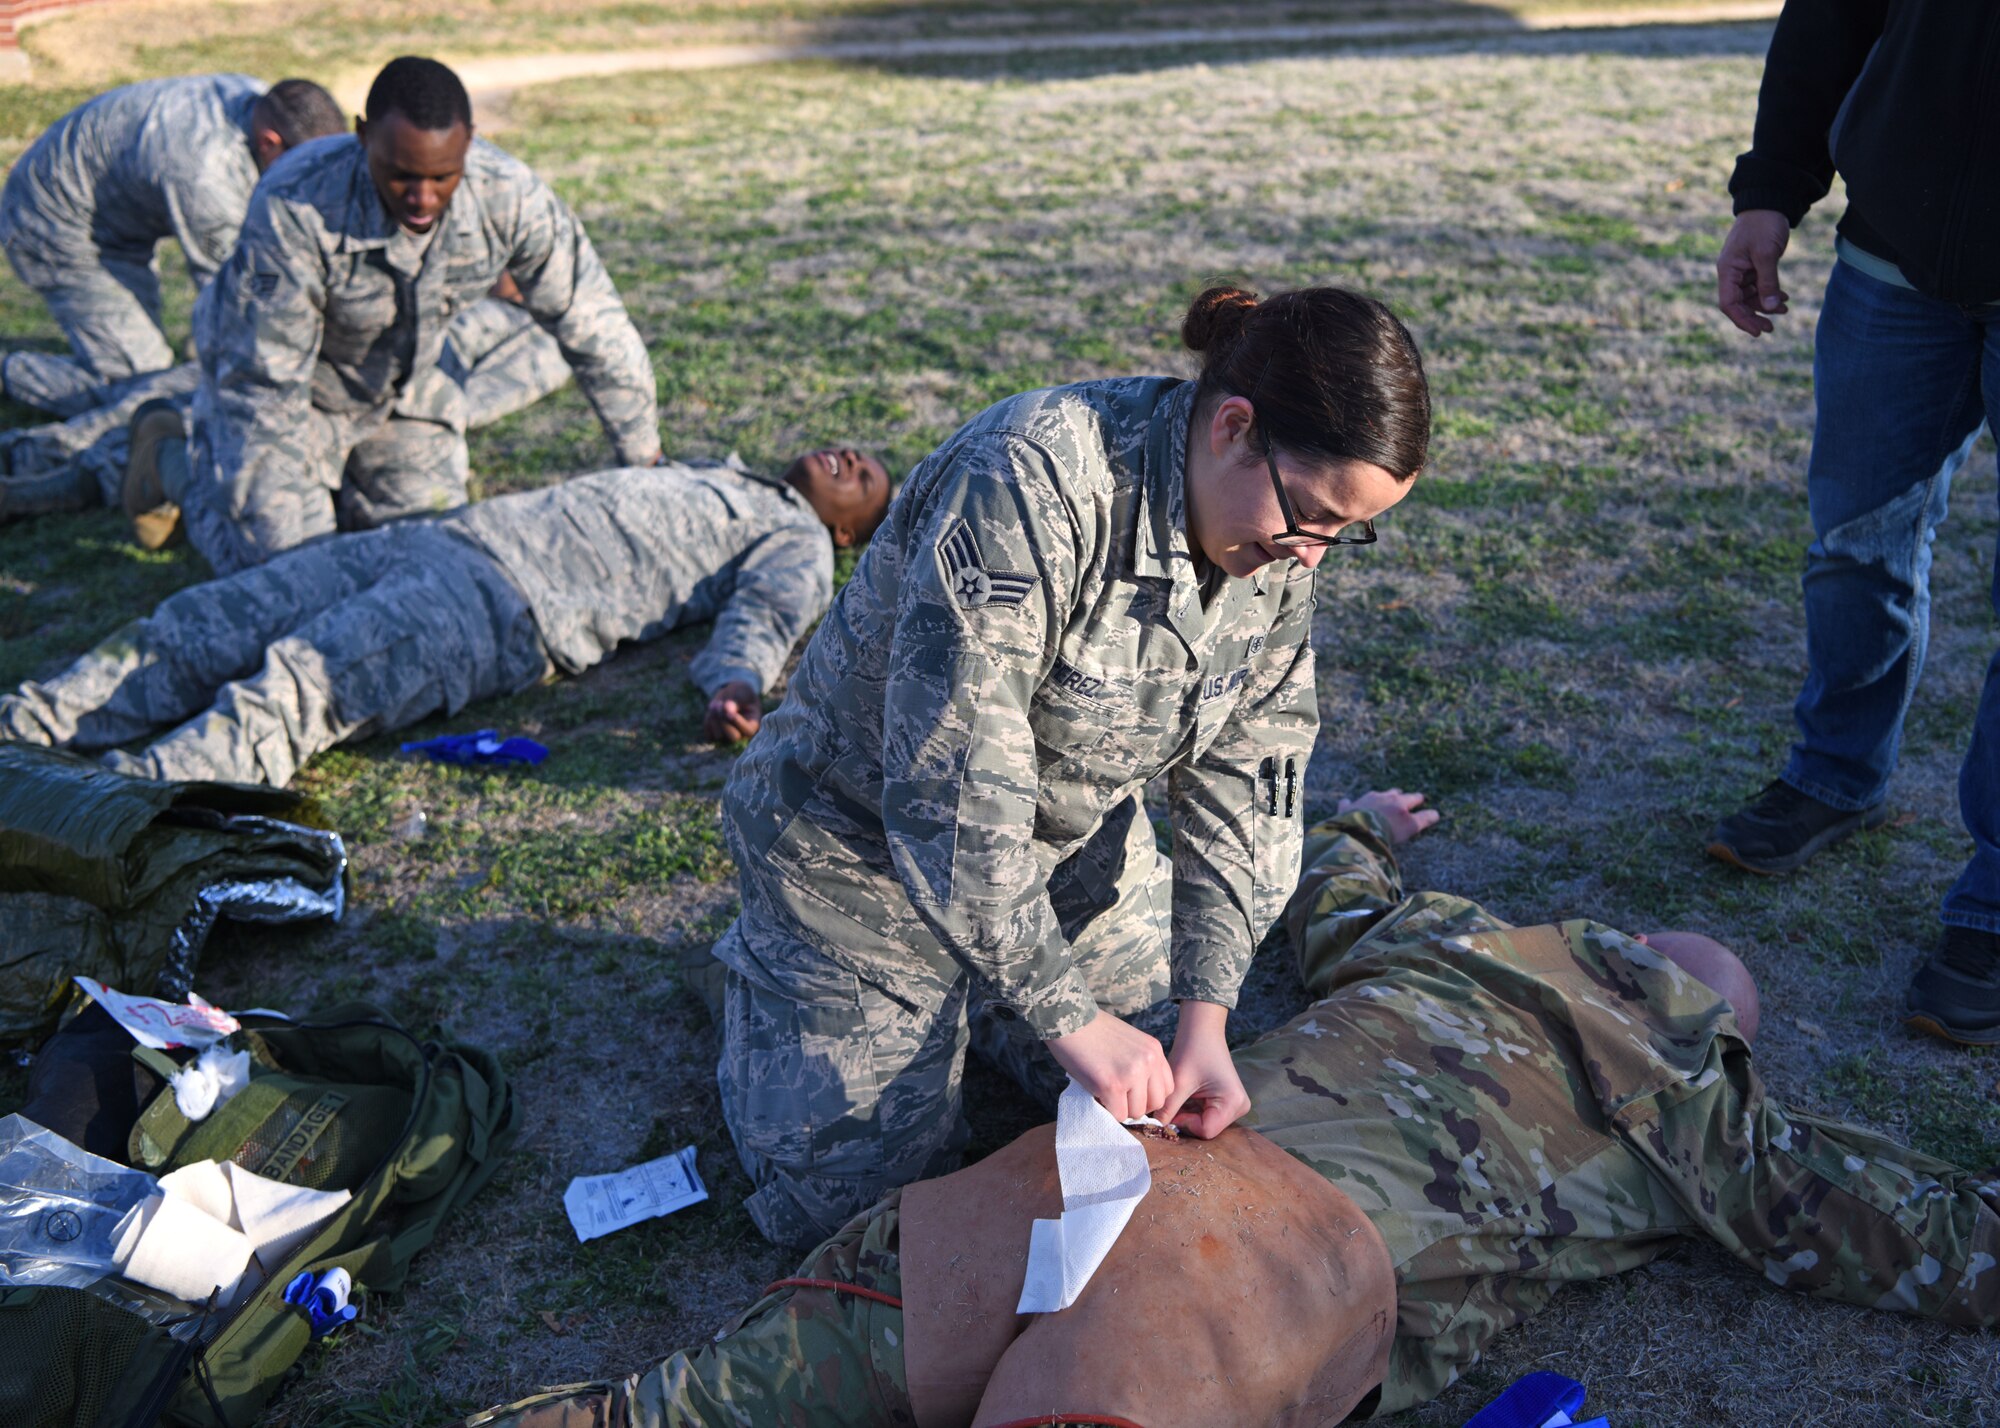 U.S. Air Force medics with the 17th Medical Group perform various first aid to simulated casualties during the Tactical Combat Casualty Care course at Goodfellow Air Force Base, Texas, Feb. 21, 2020. TCCC training has four levels of qualification, tiers one through three are for all other service members and tier four is for medical providers. (U.S. Air Force photo by Airman 1st Class Ethan Sherwood)